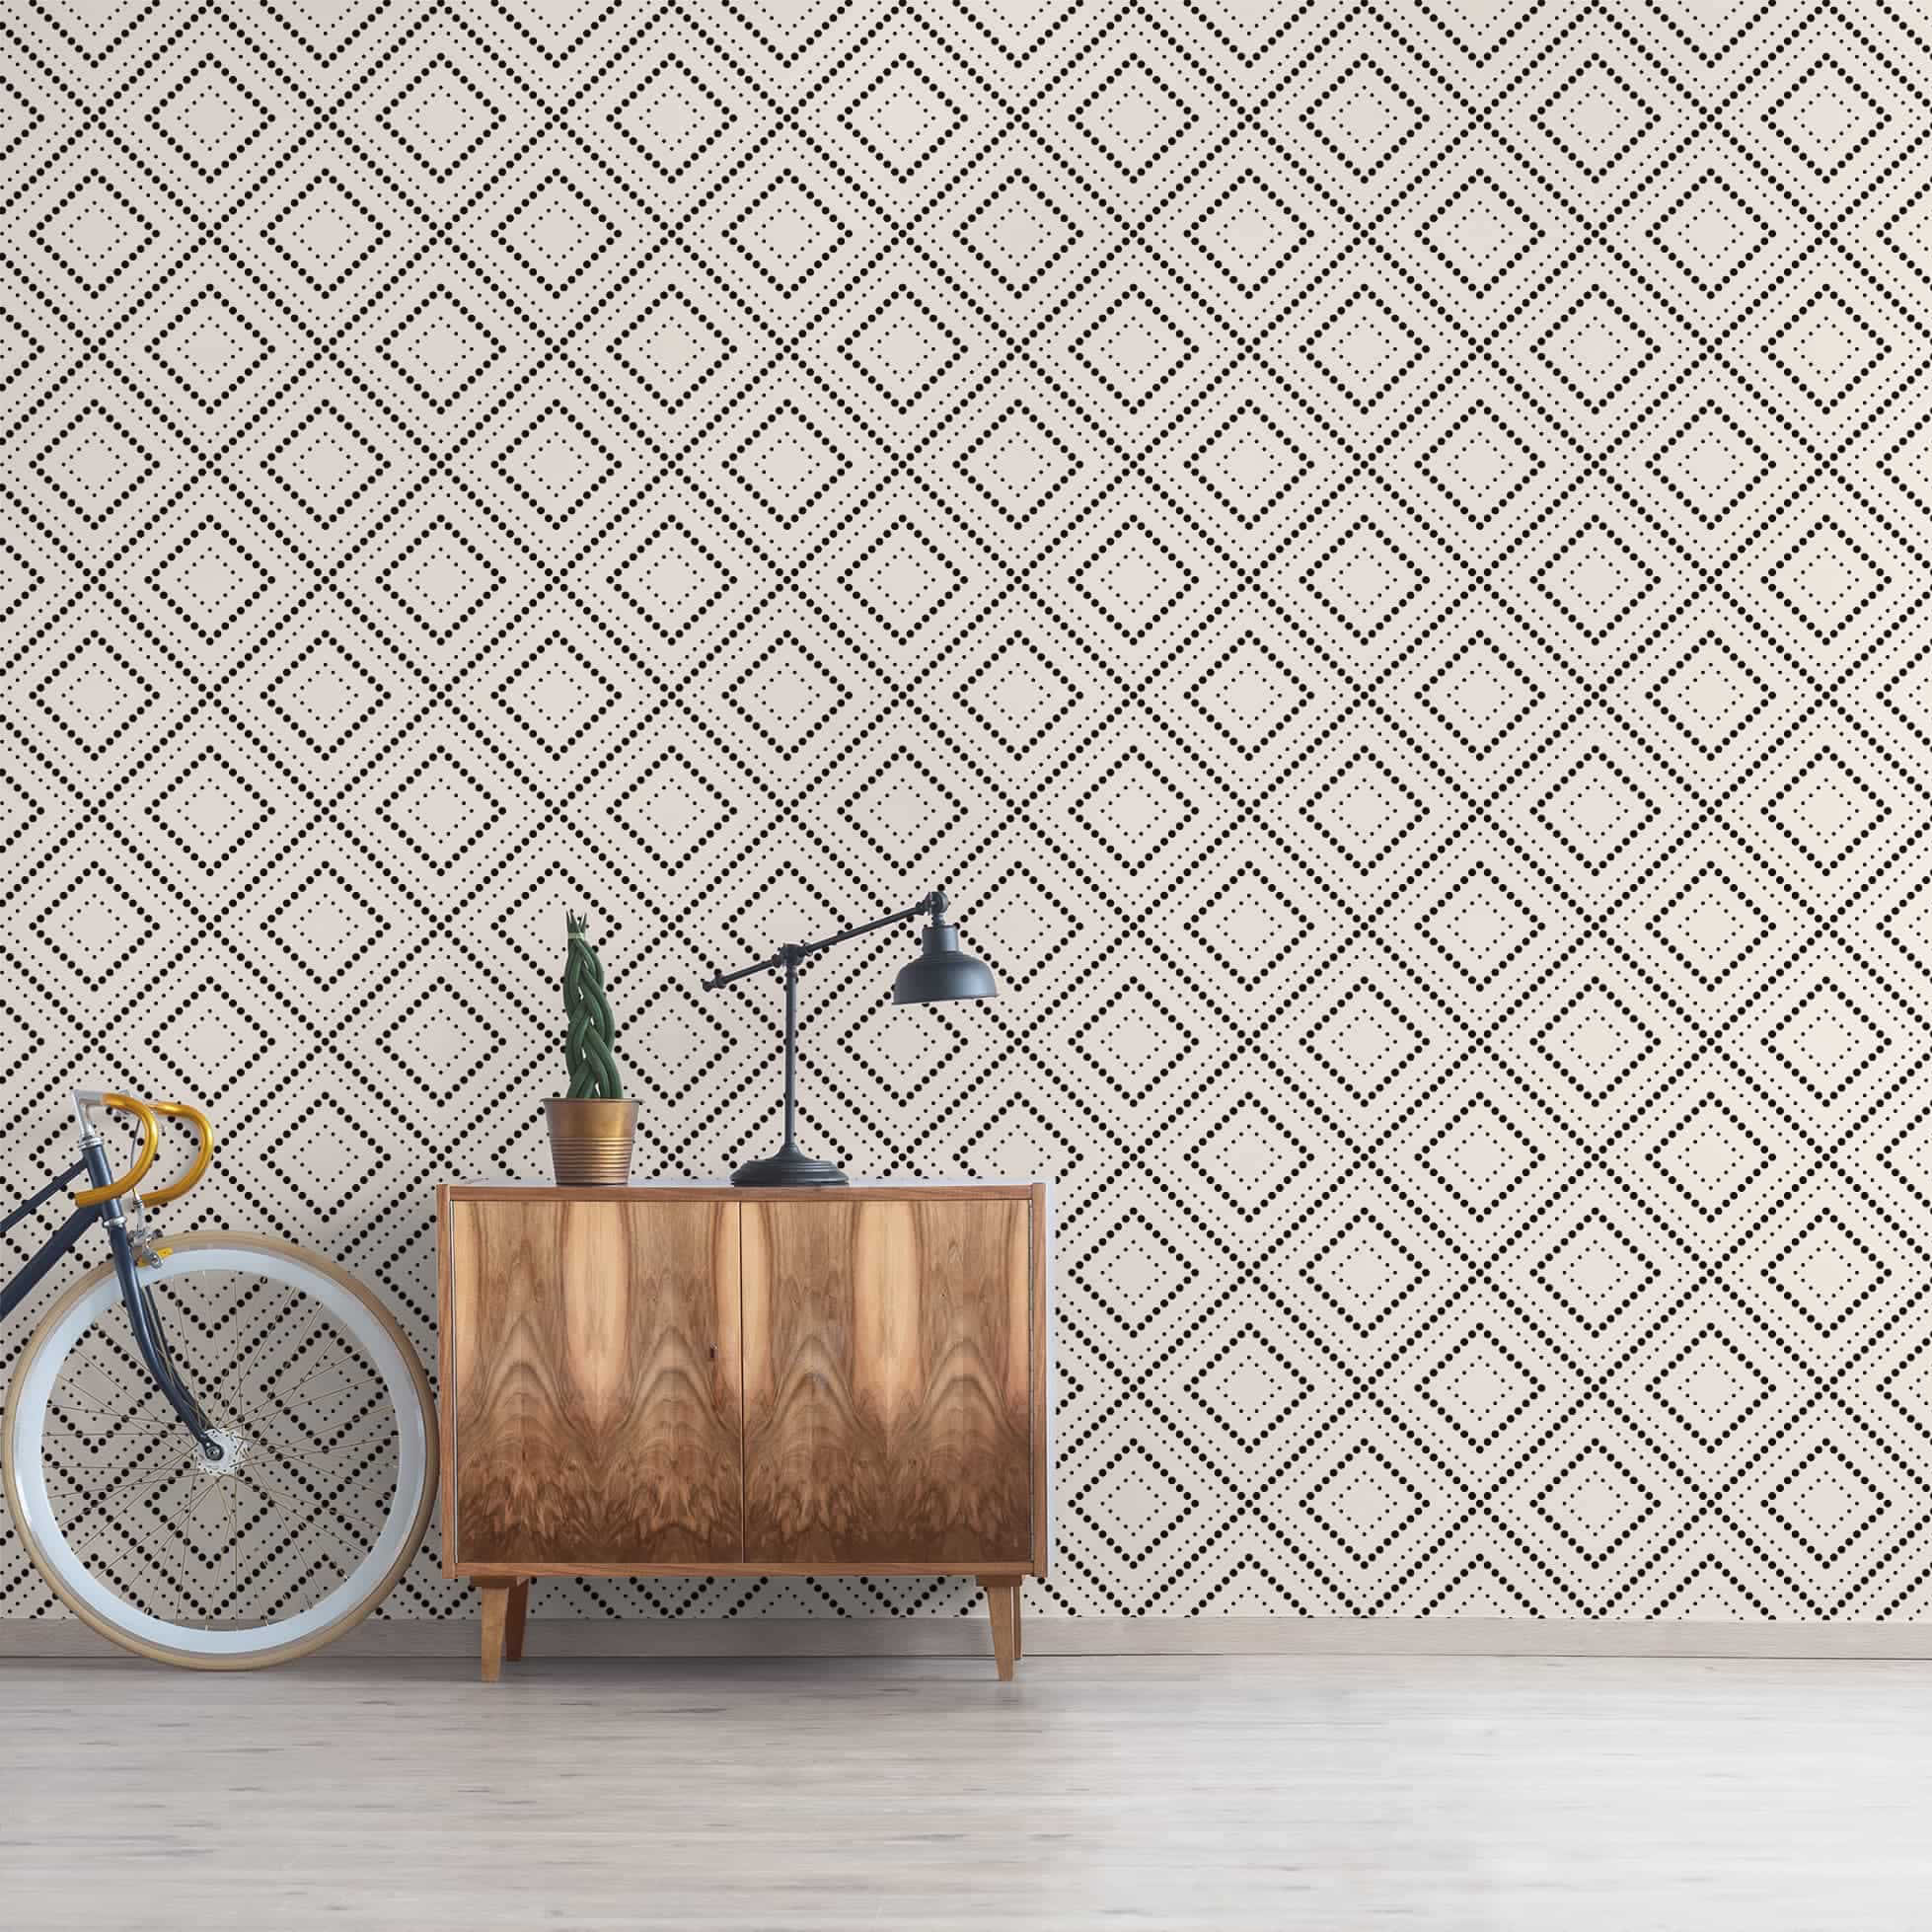 How To Cover Textured Walls With Wallpaper | Tempaper & Co.